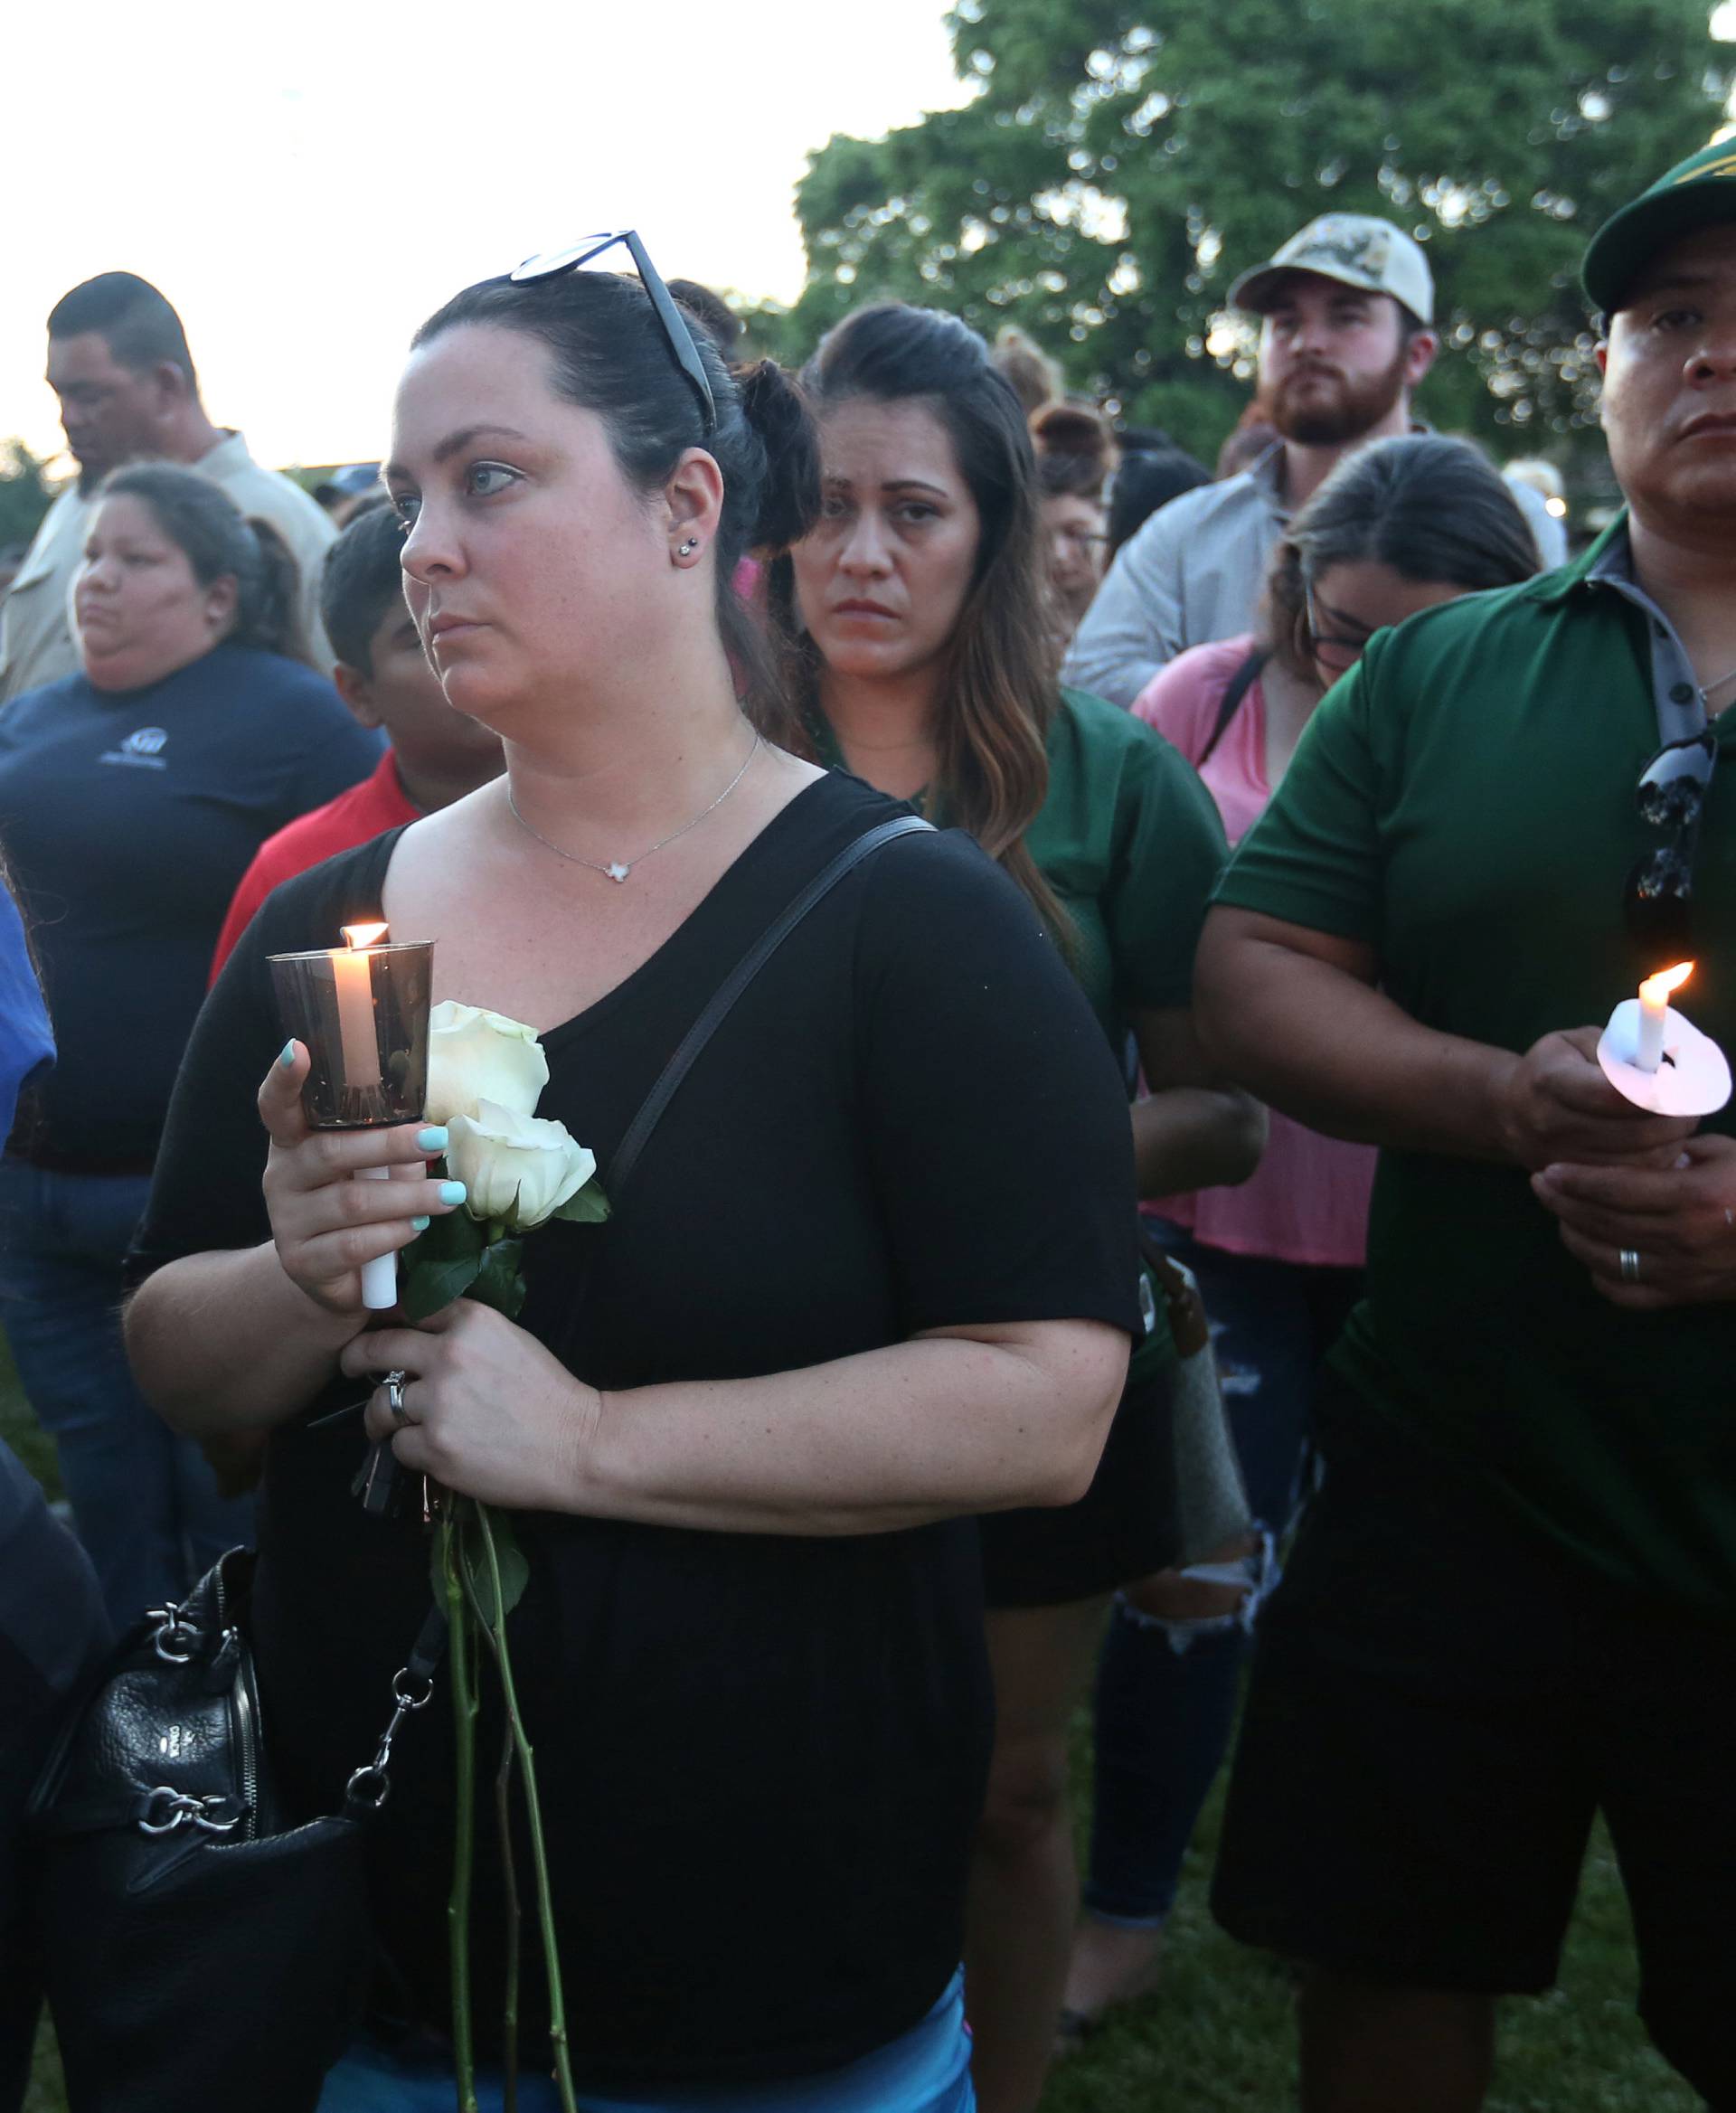 People gather with candles during a vigil held after a shooting left several people dead at Santa Fe High School in Santa Fe, Texas